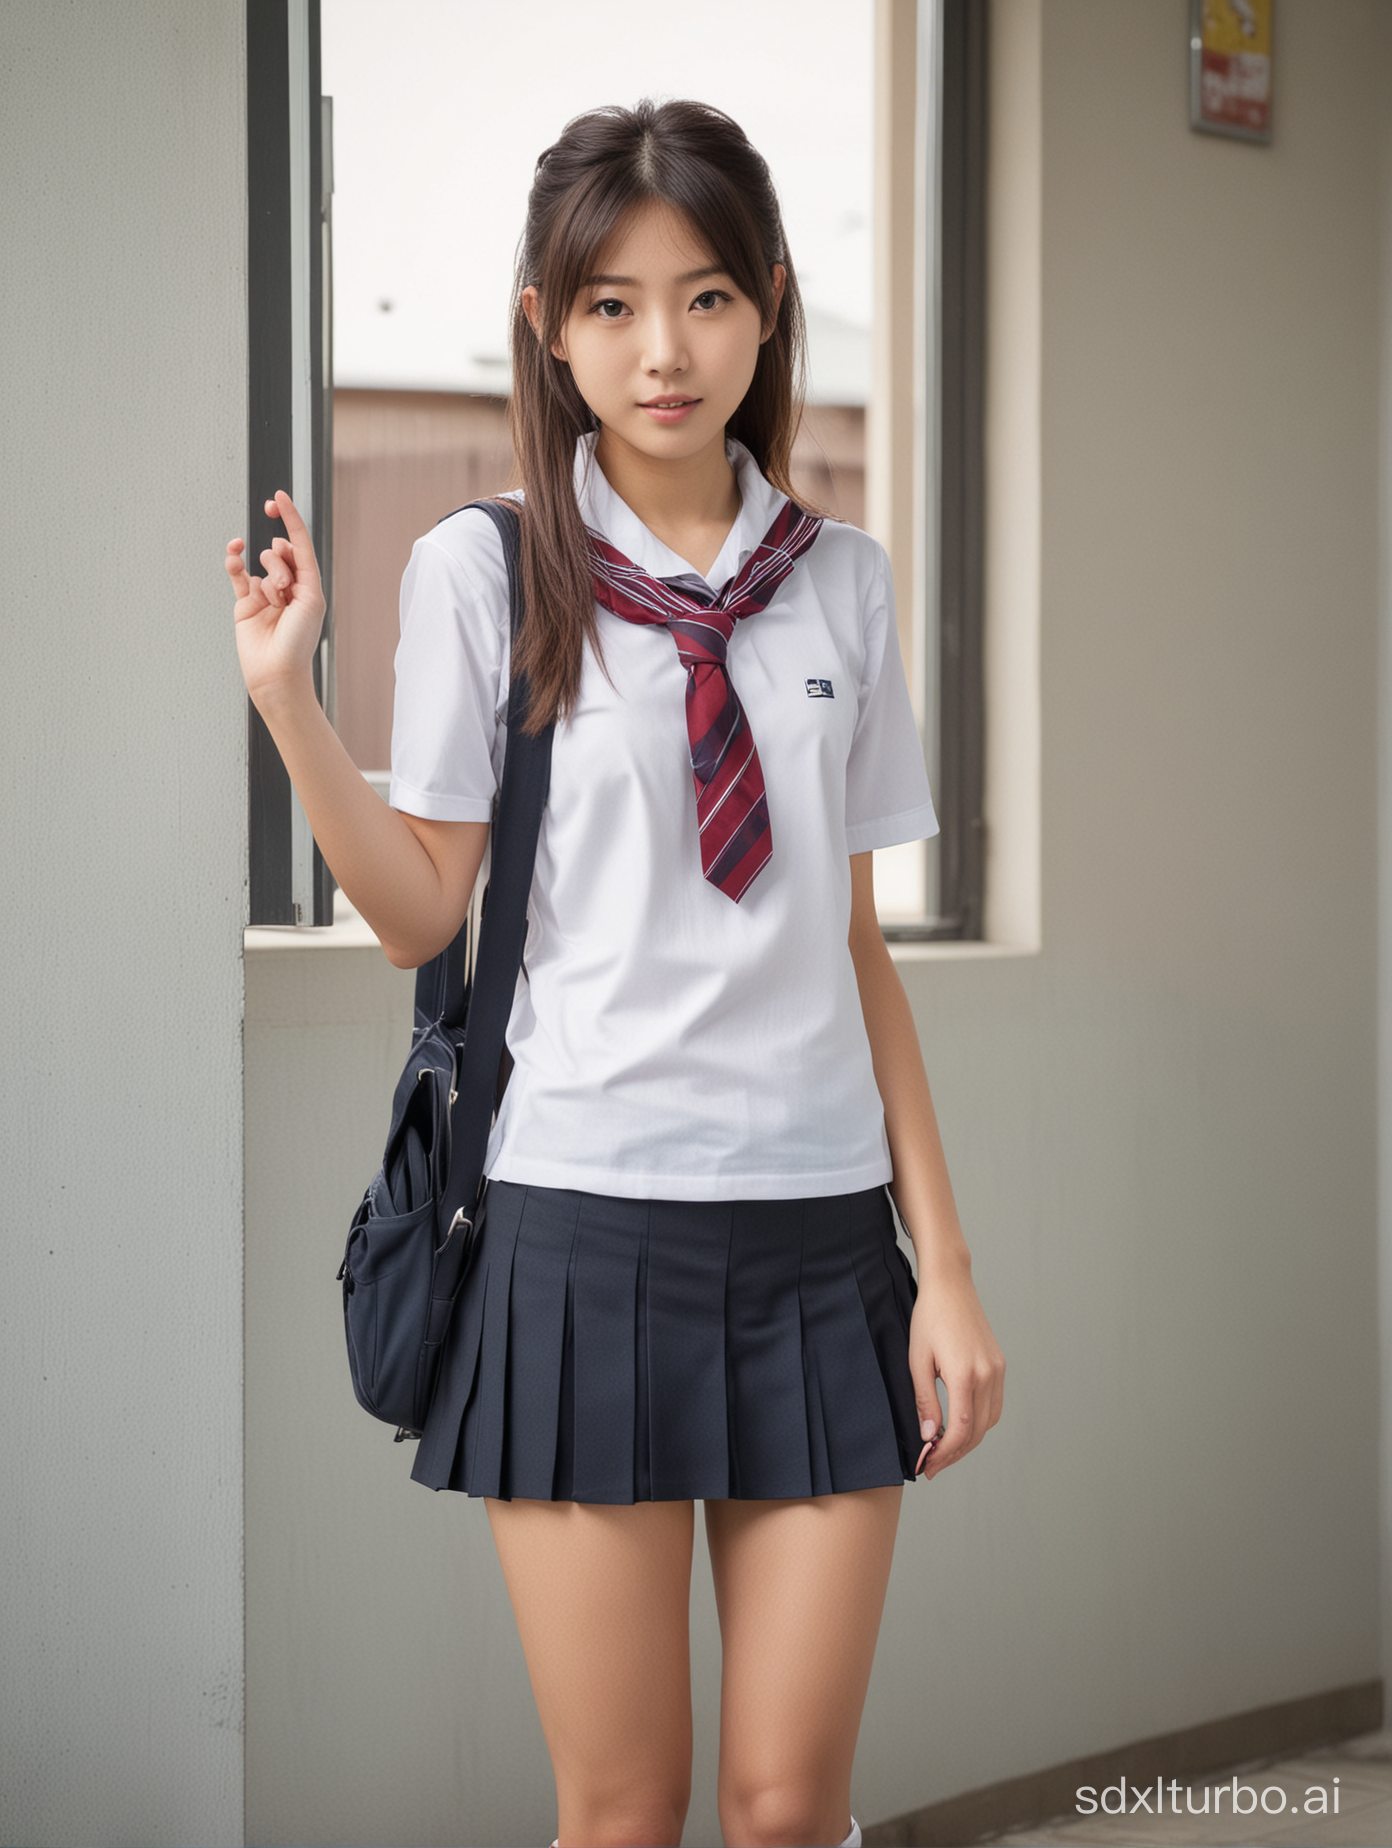 Japanese girl, age 18 years, wearing school uniform, very short skirt, in front at school